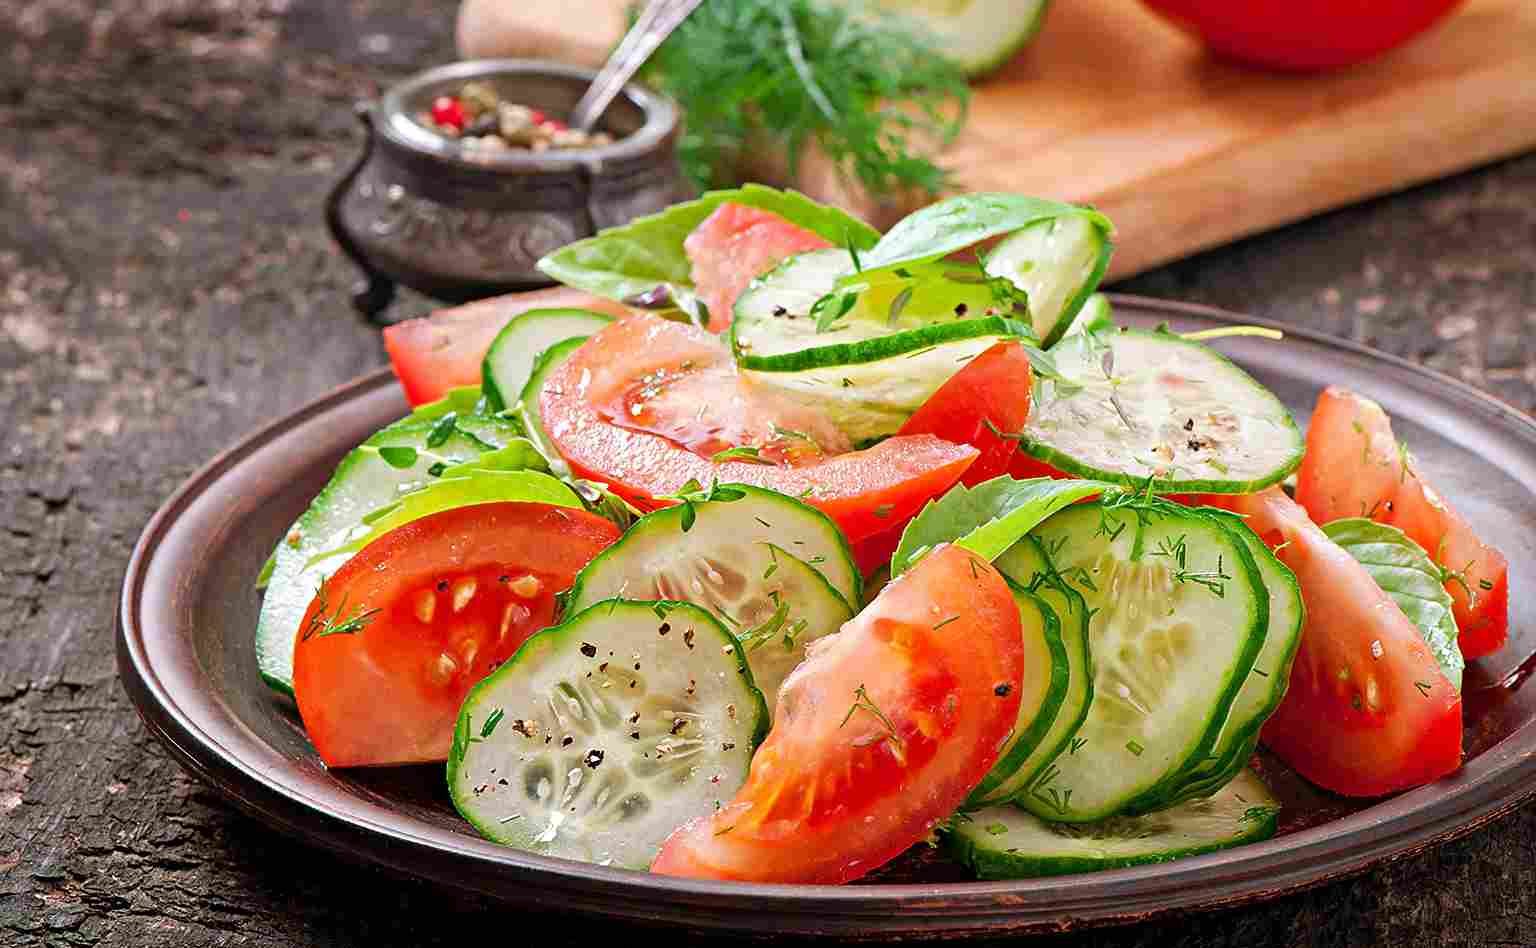  cucumber tomato salad + purchase price, use, uses and properties 